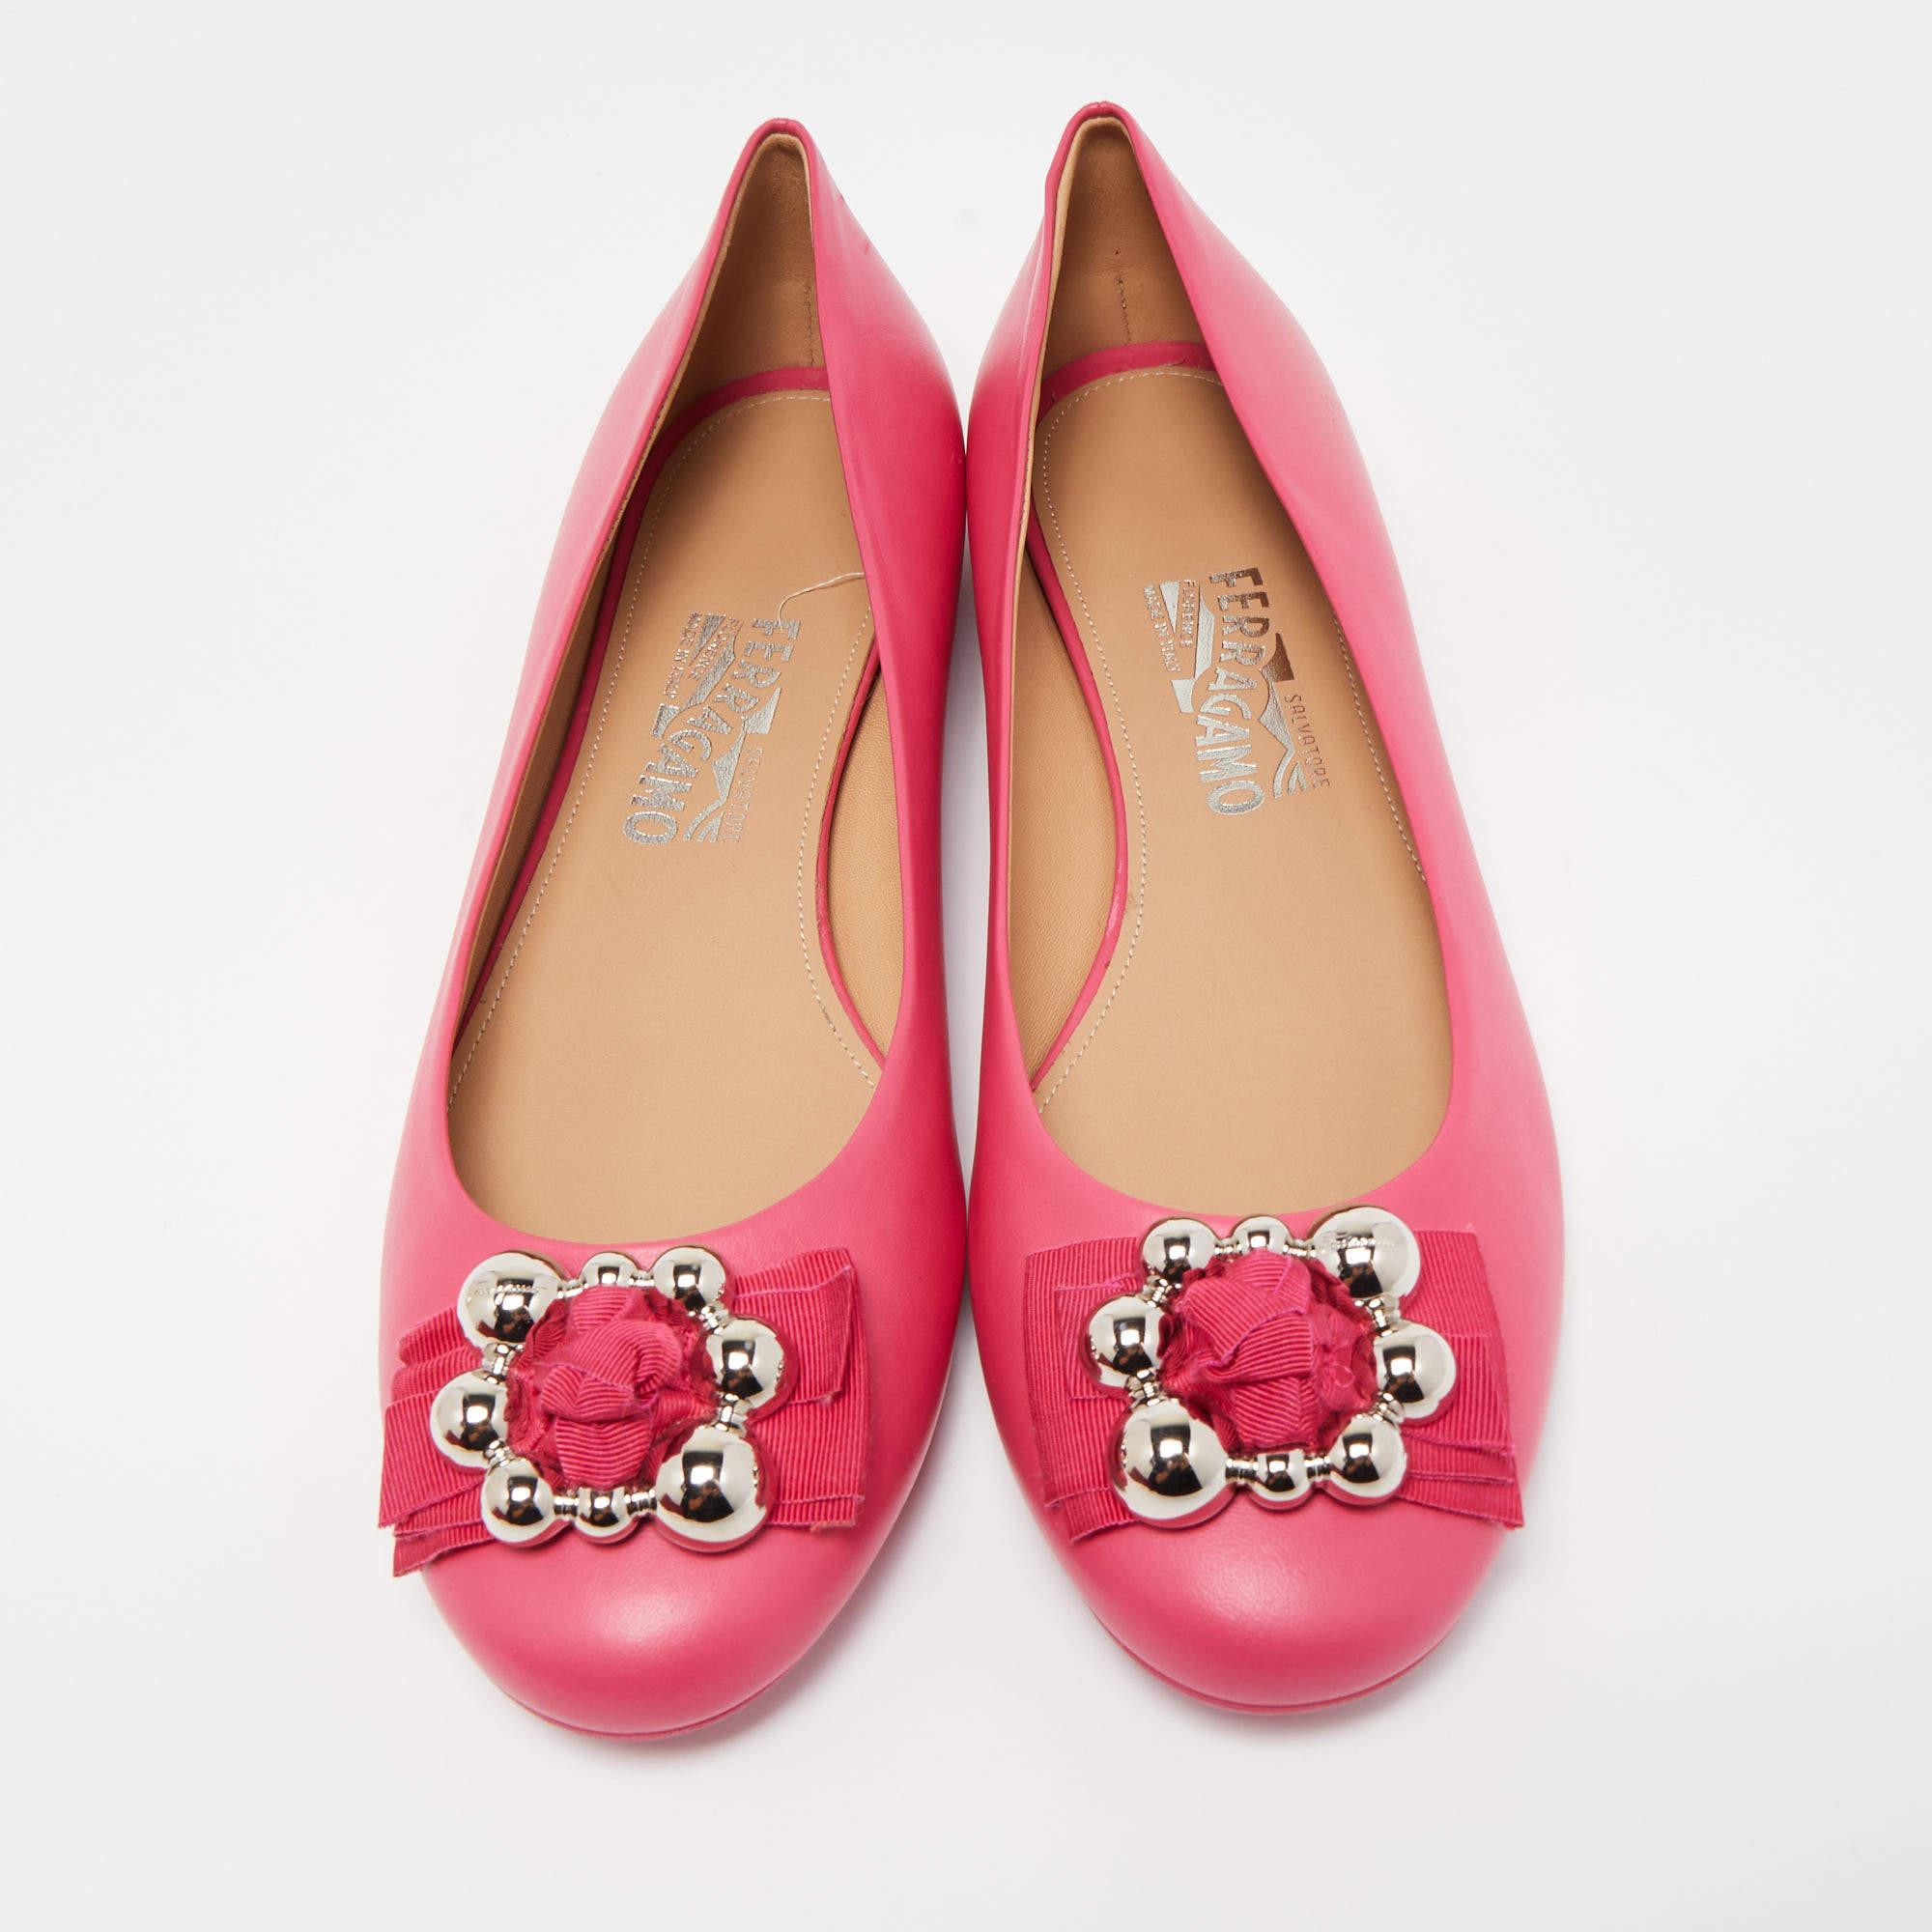 Complete your look by adding these Salvatore Ferragamo pink ballet flats to your collection of everyday footwear. They are crafted skilfully to grant the perfect fit and style.

Includes: Original Dustbag, Original Box, Info Booklet

